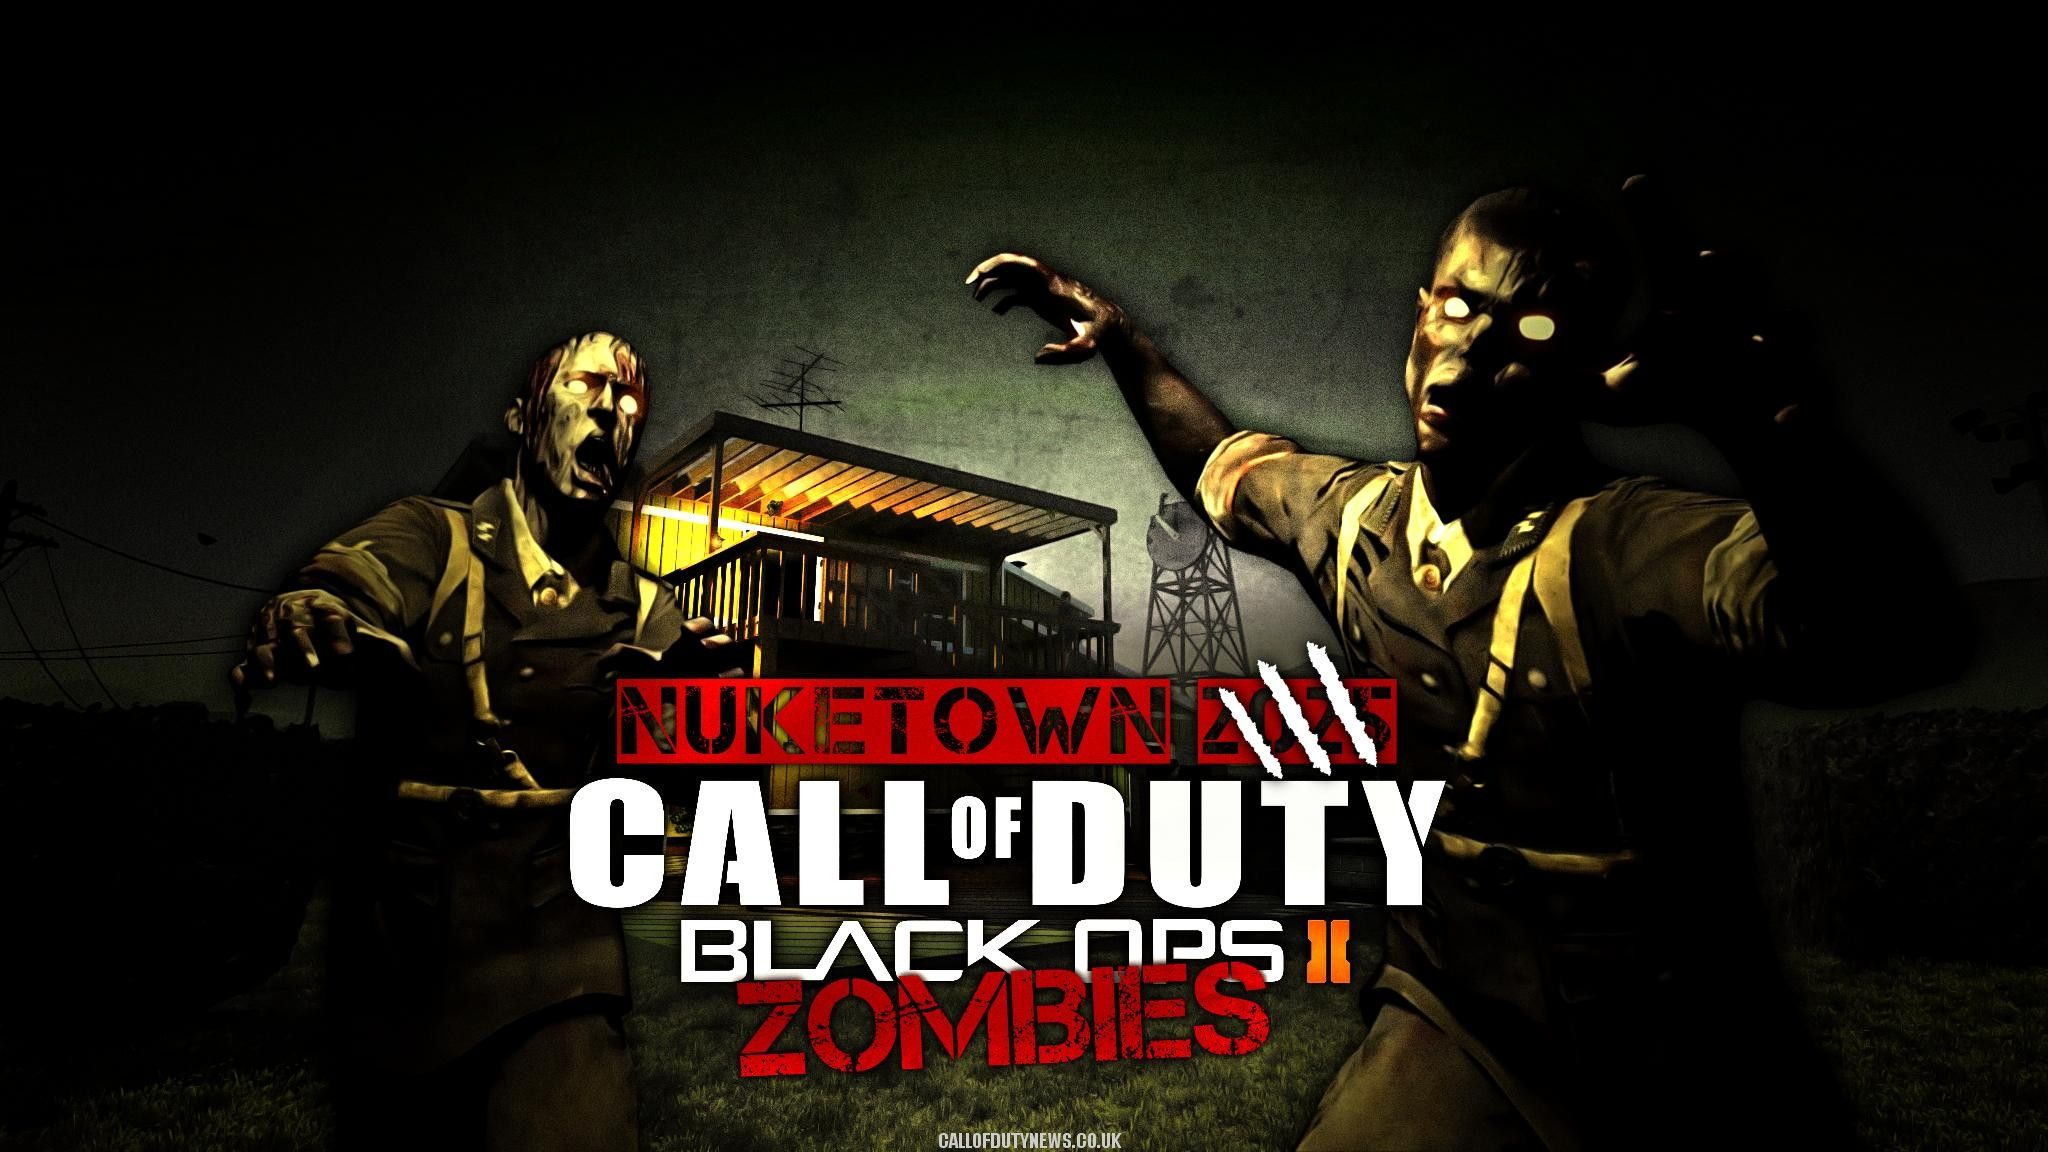 call of duty black ops zombies wallpaper #22